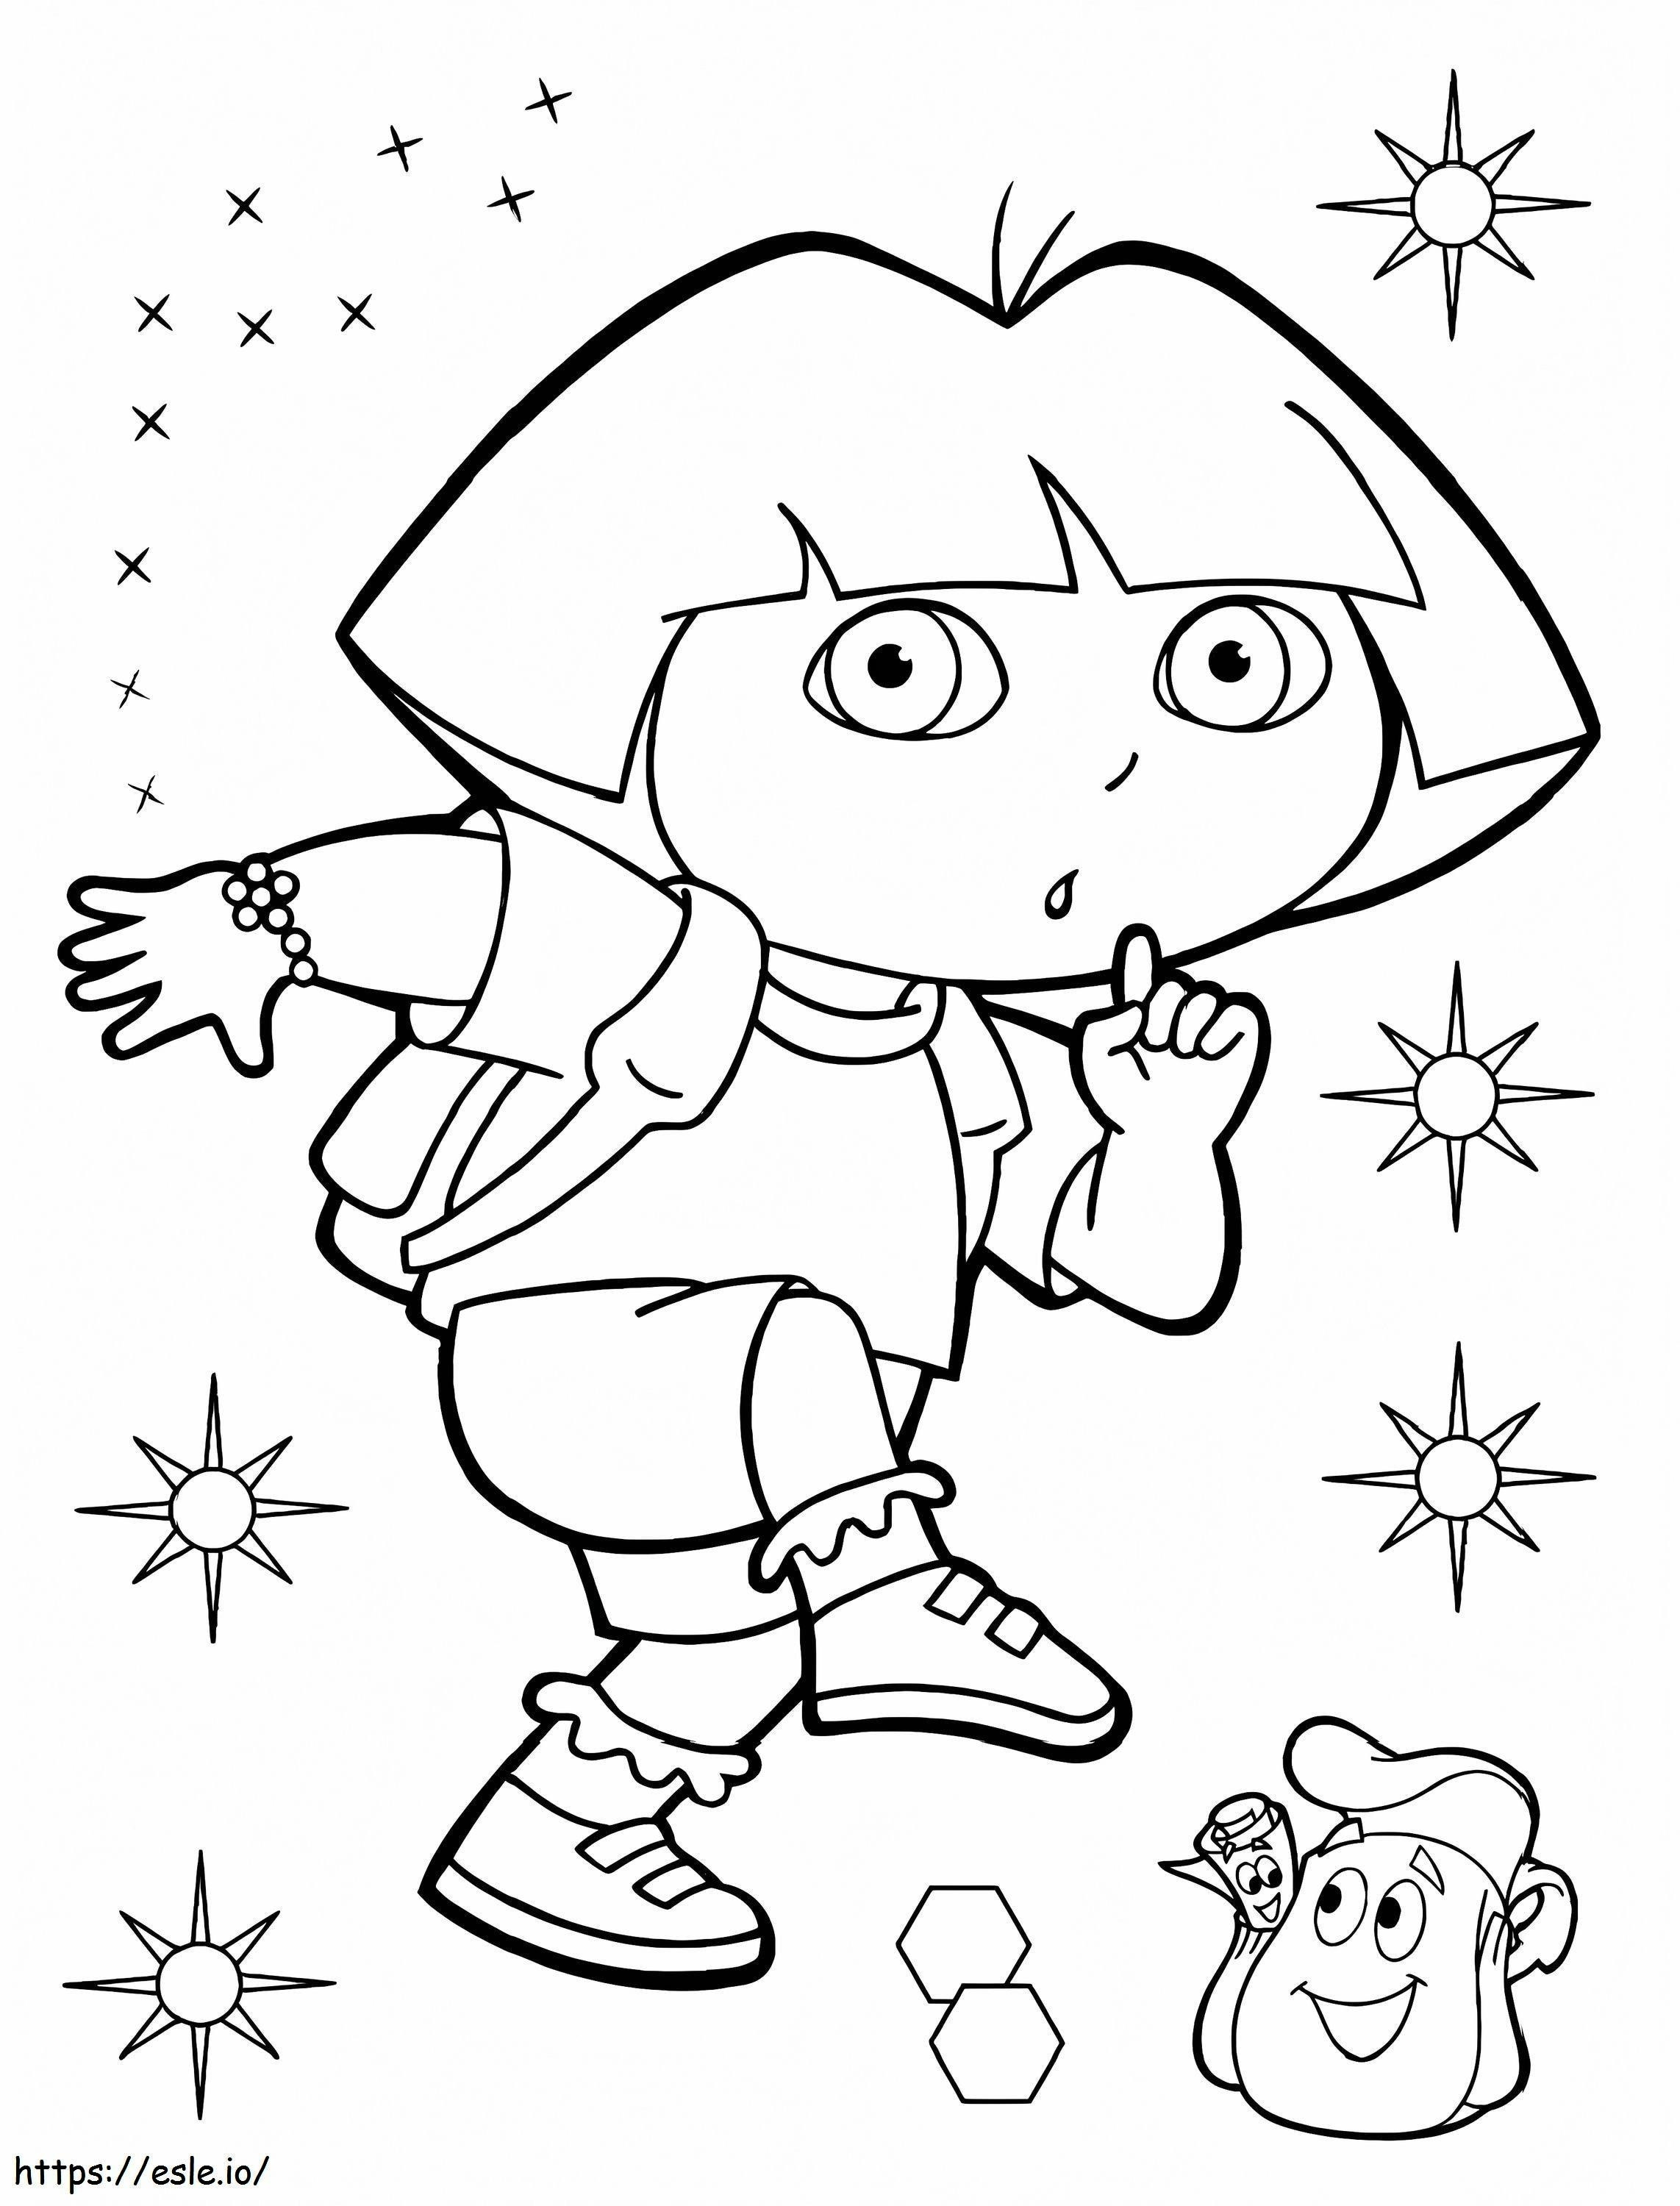 Tranquil Dora coloring page